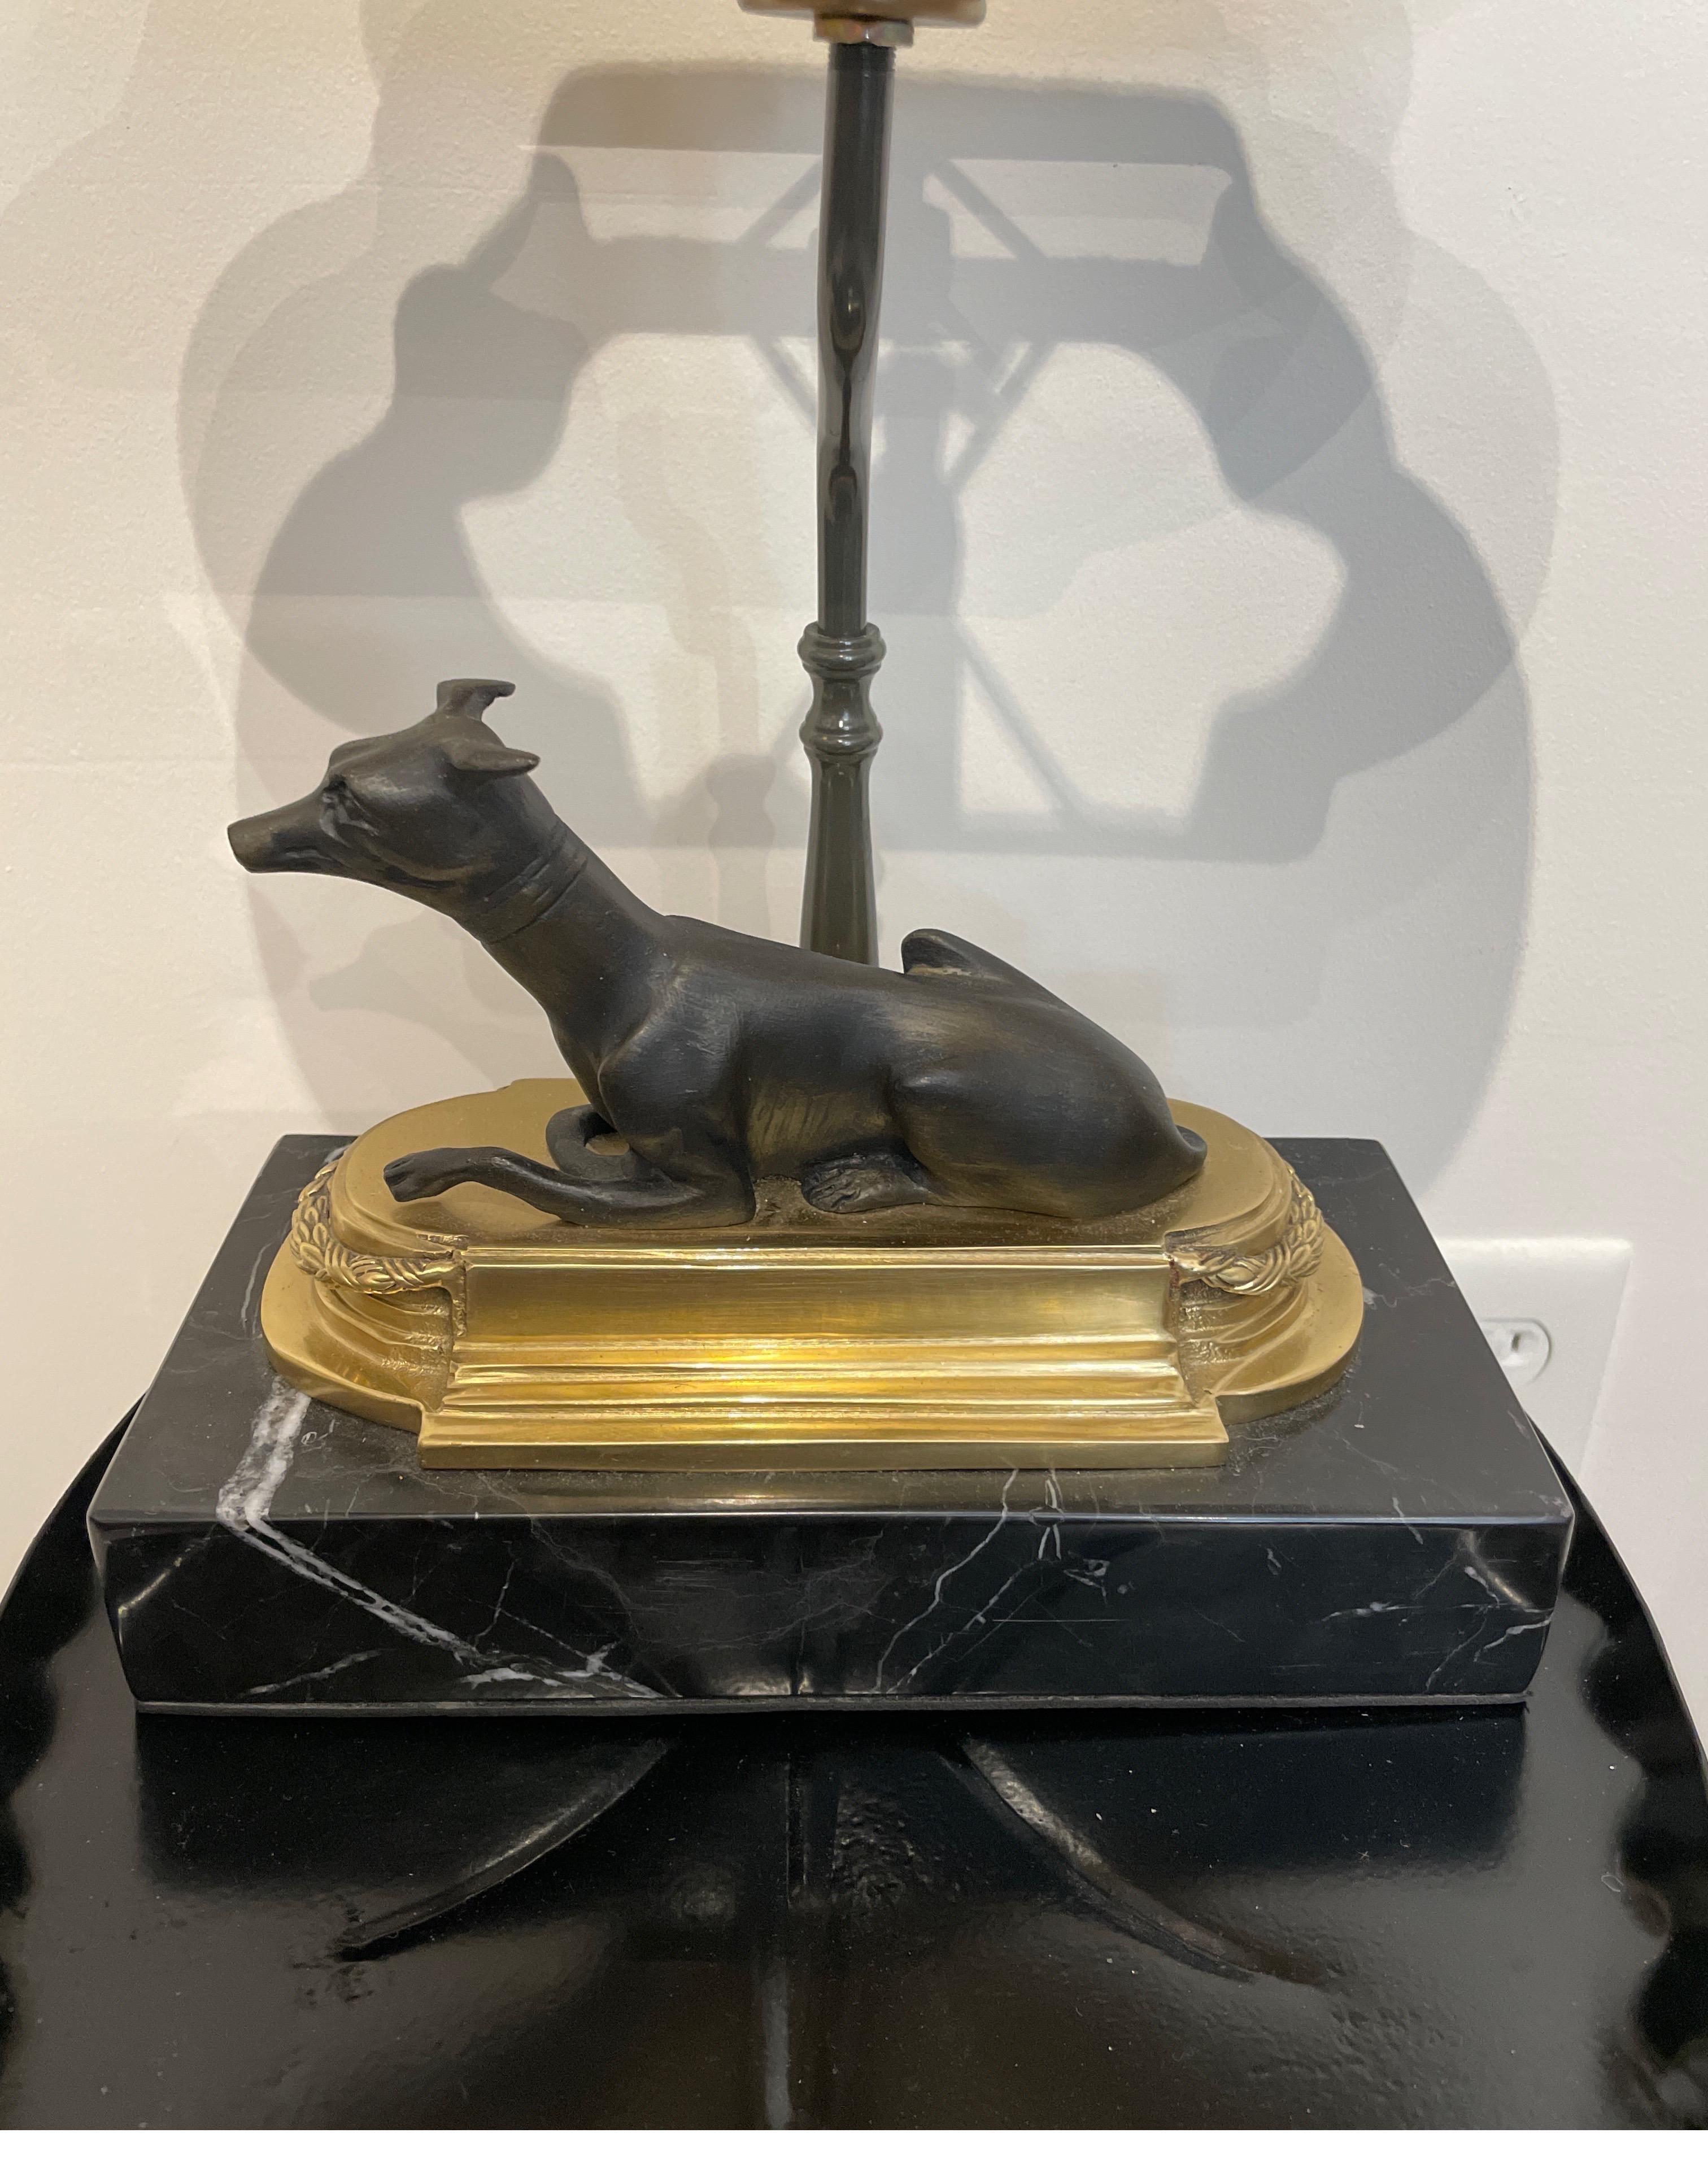 Reclining bronze greyhound table / desk lamp on brass & marble base with silk shade. This neoclassical lamp with brass wreath finial will add class to any setting.